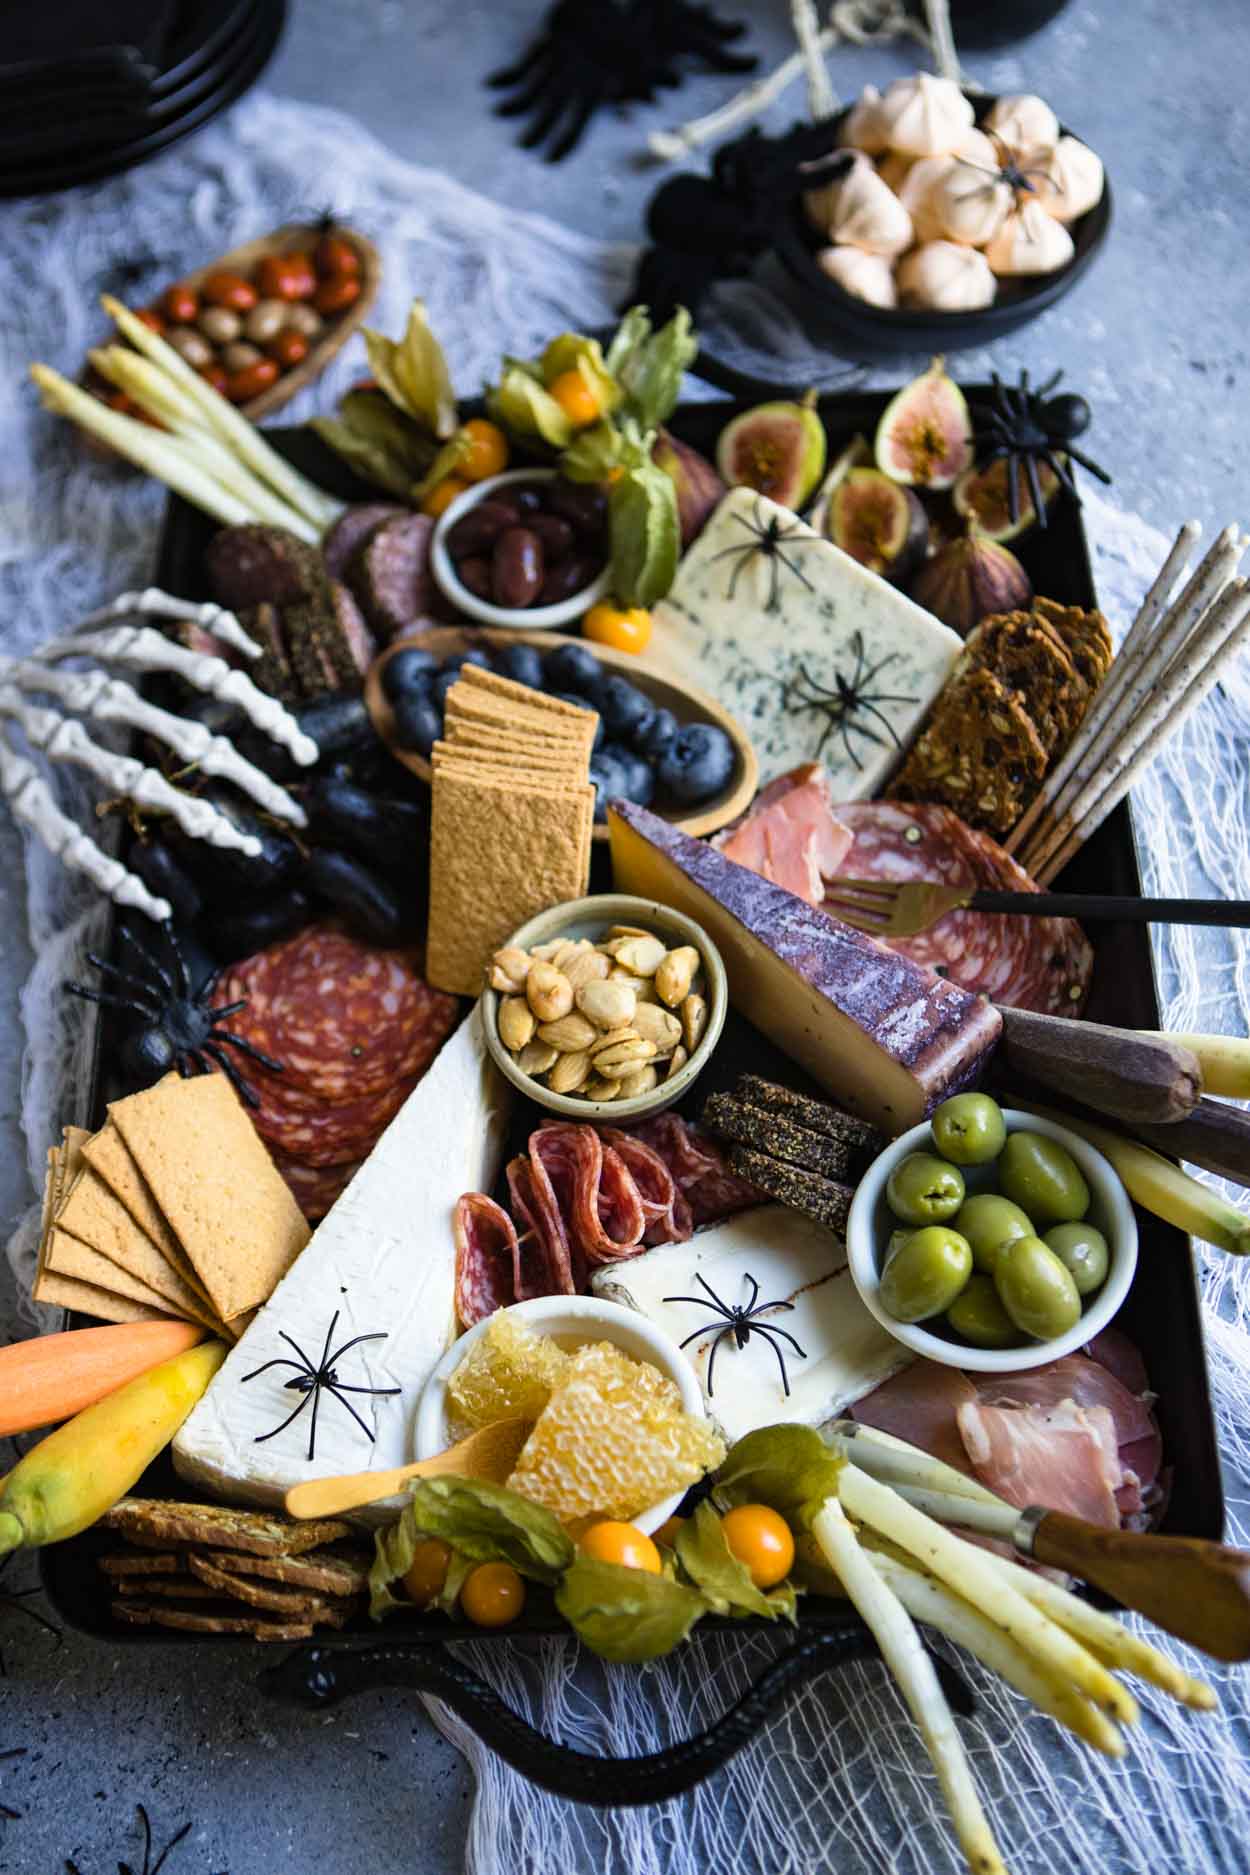 Charcuterie board on a black platter with spiders and skeleton hand on a gray board